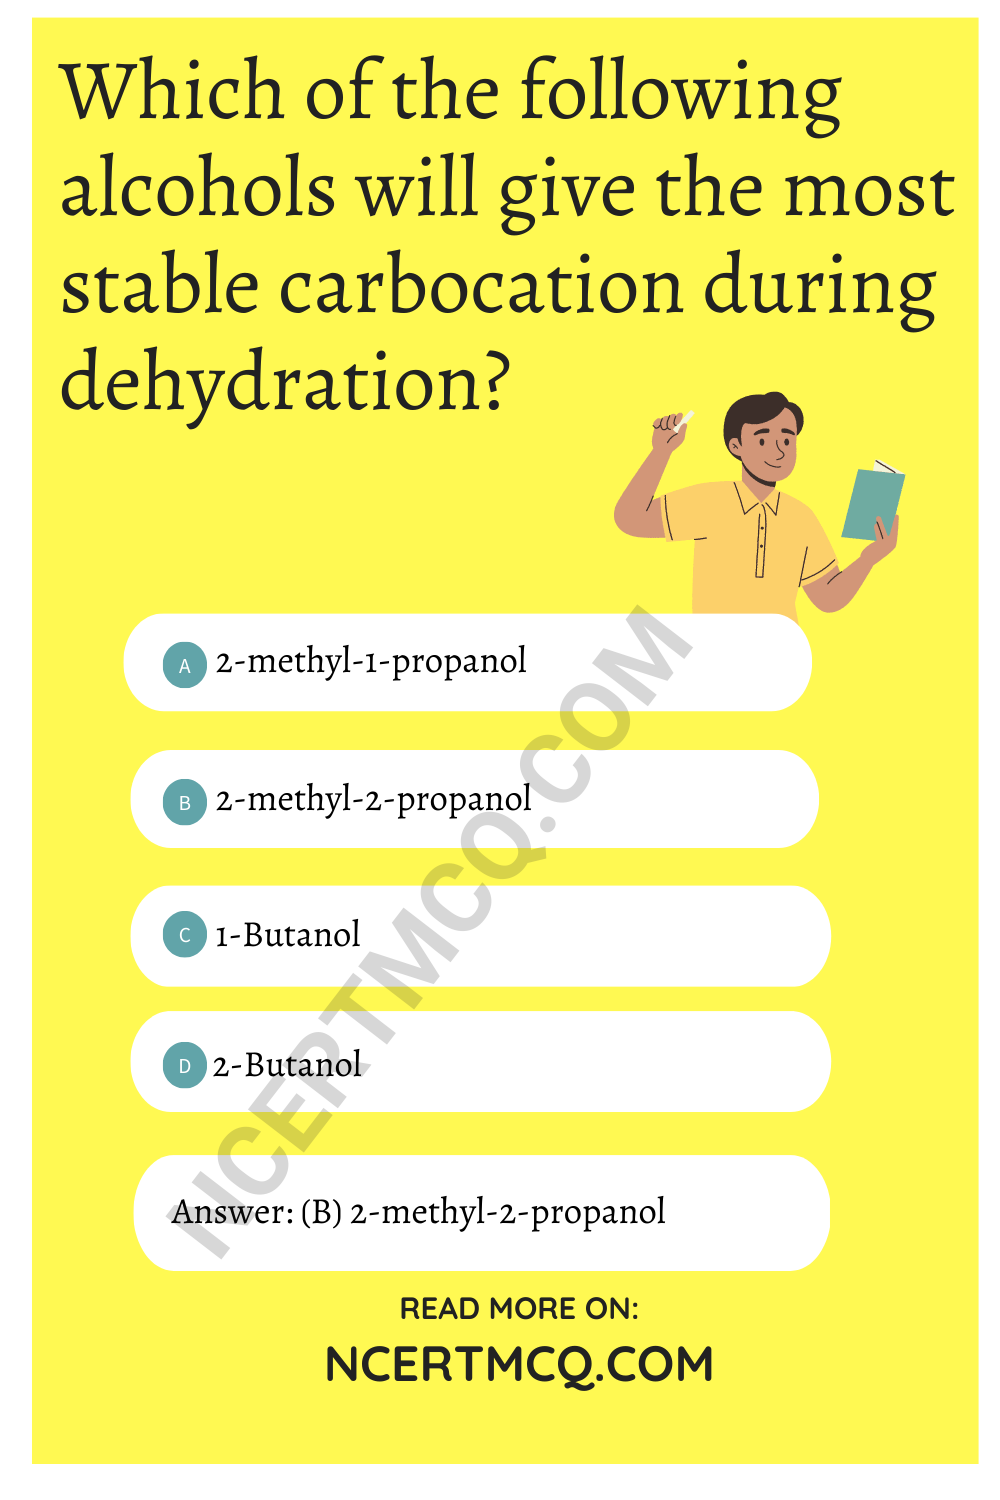 Which of the following alcohols will give the most stable carbocation during dehydration?